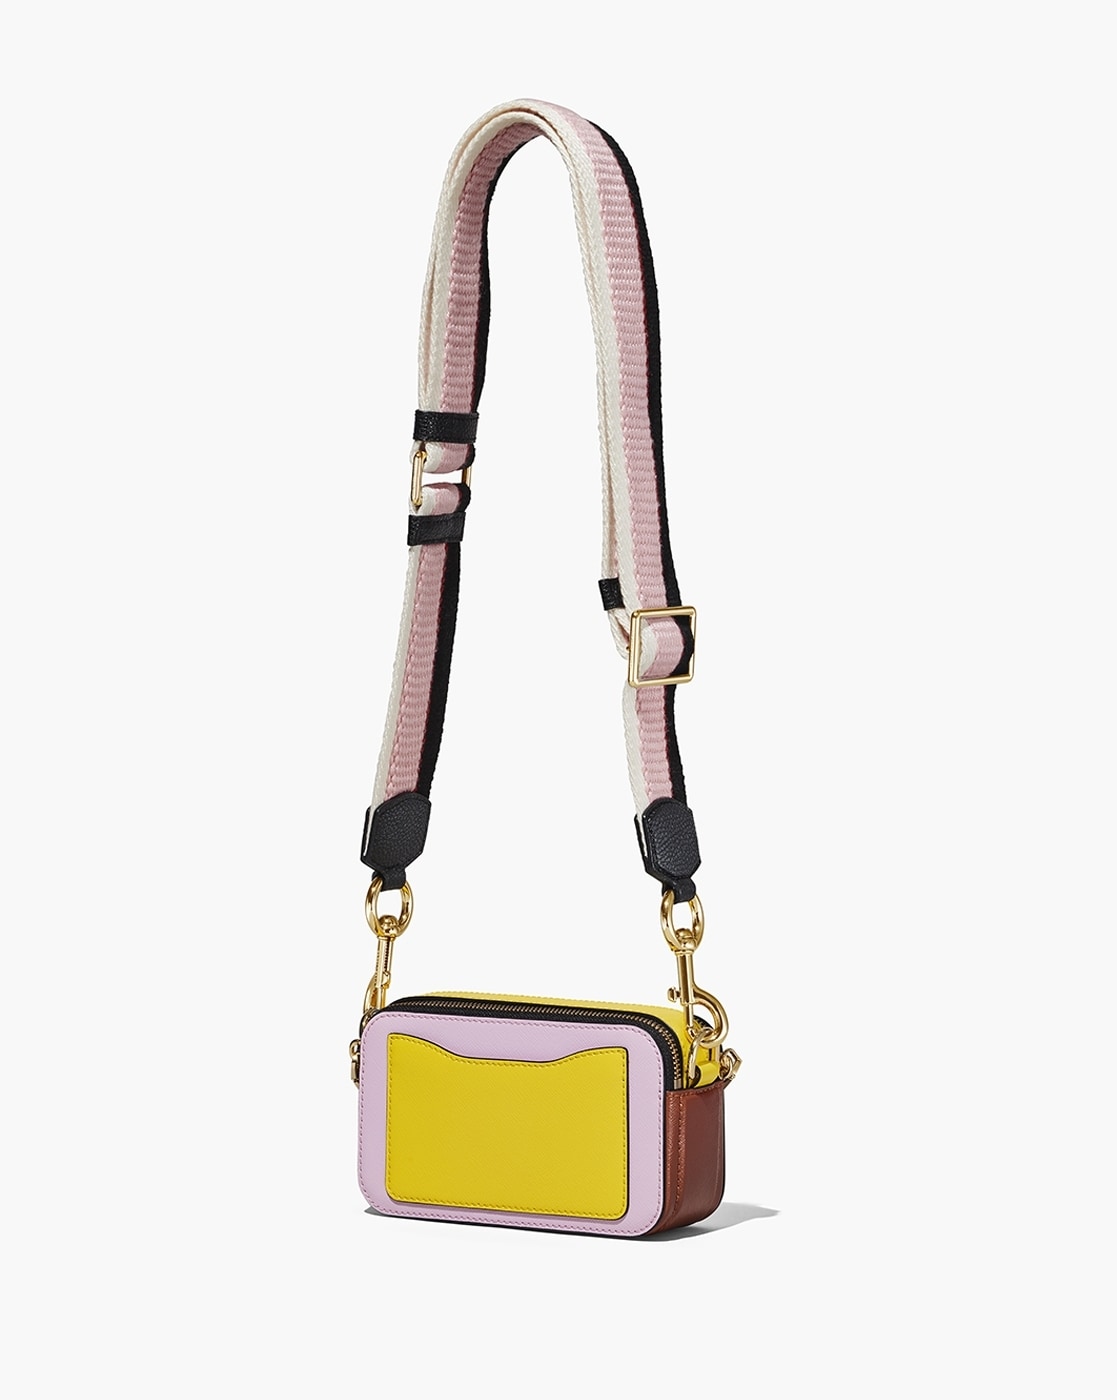 THE SNAPSHOT AIRBRUSH BY MARC JACOBS CROSSBODY BAG